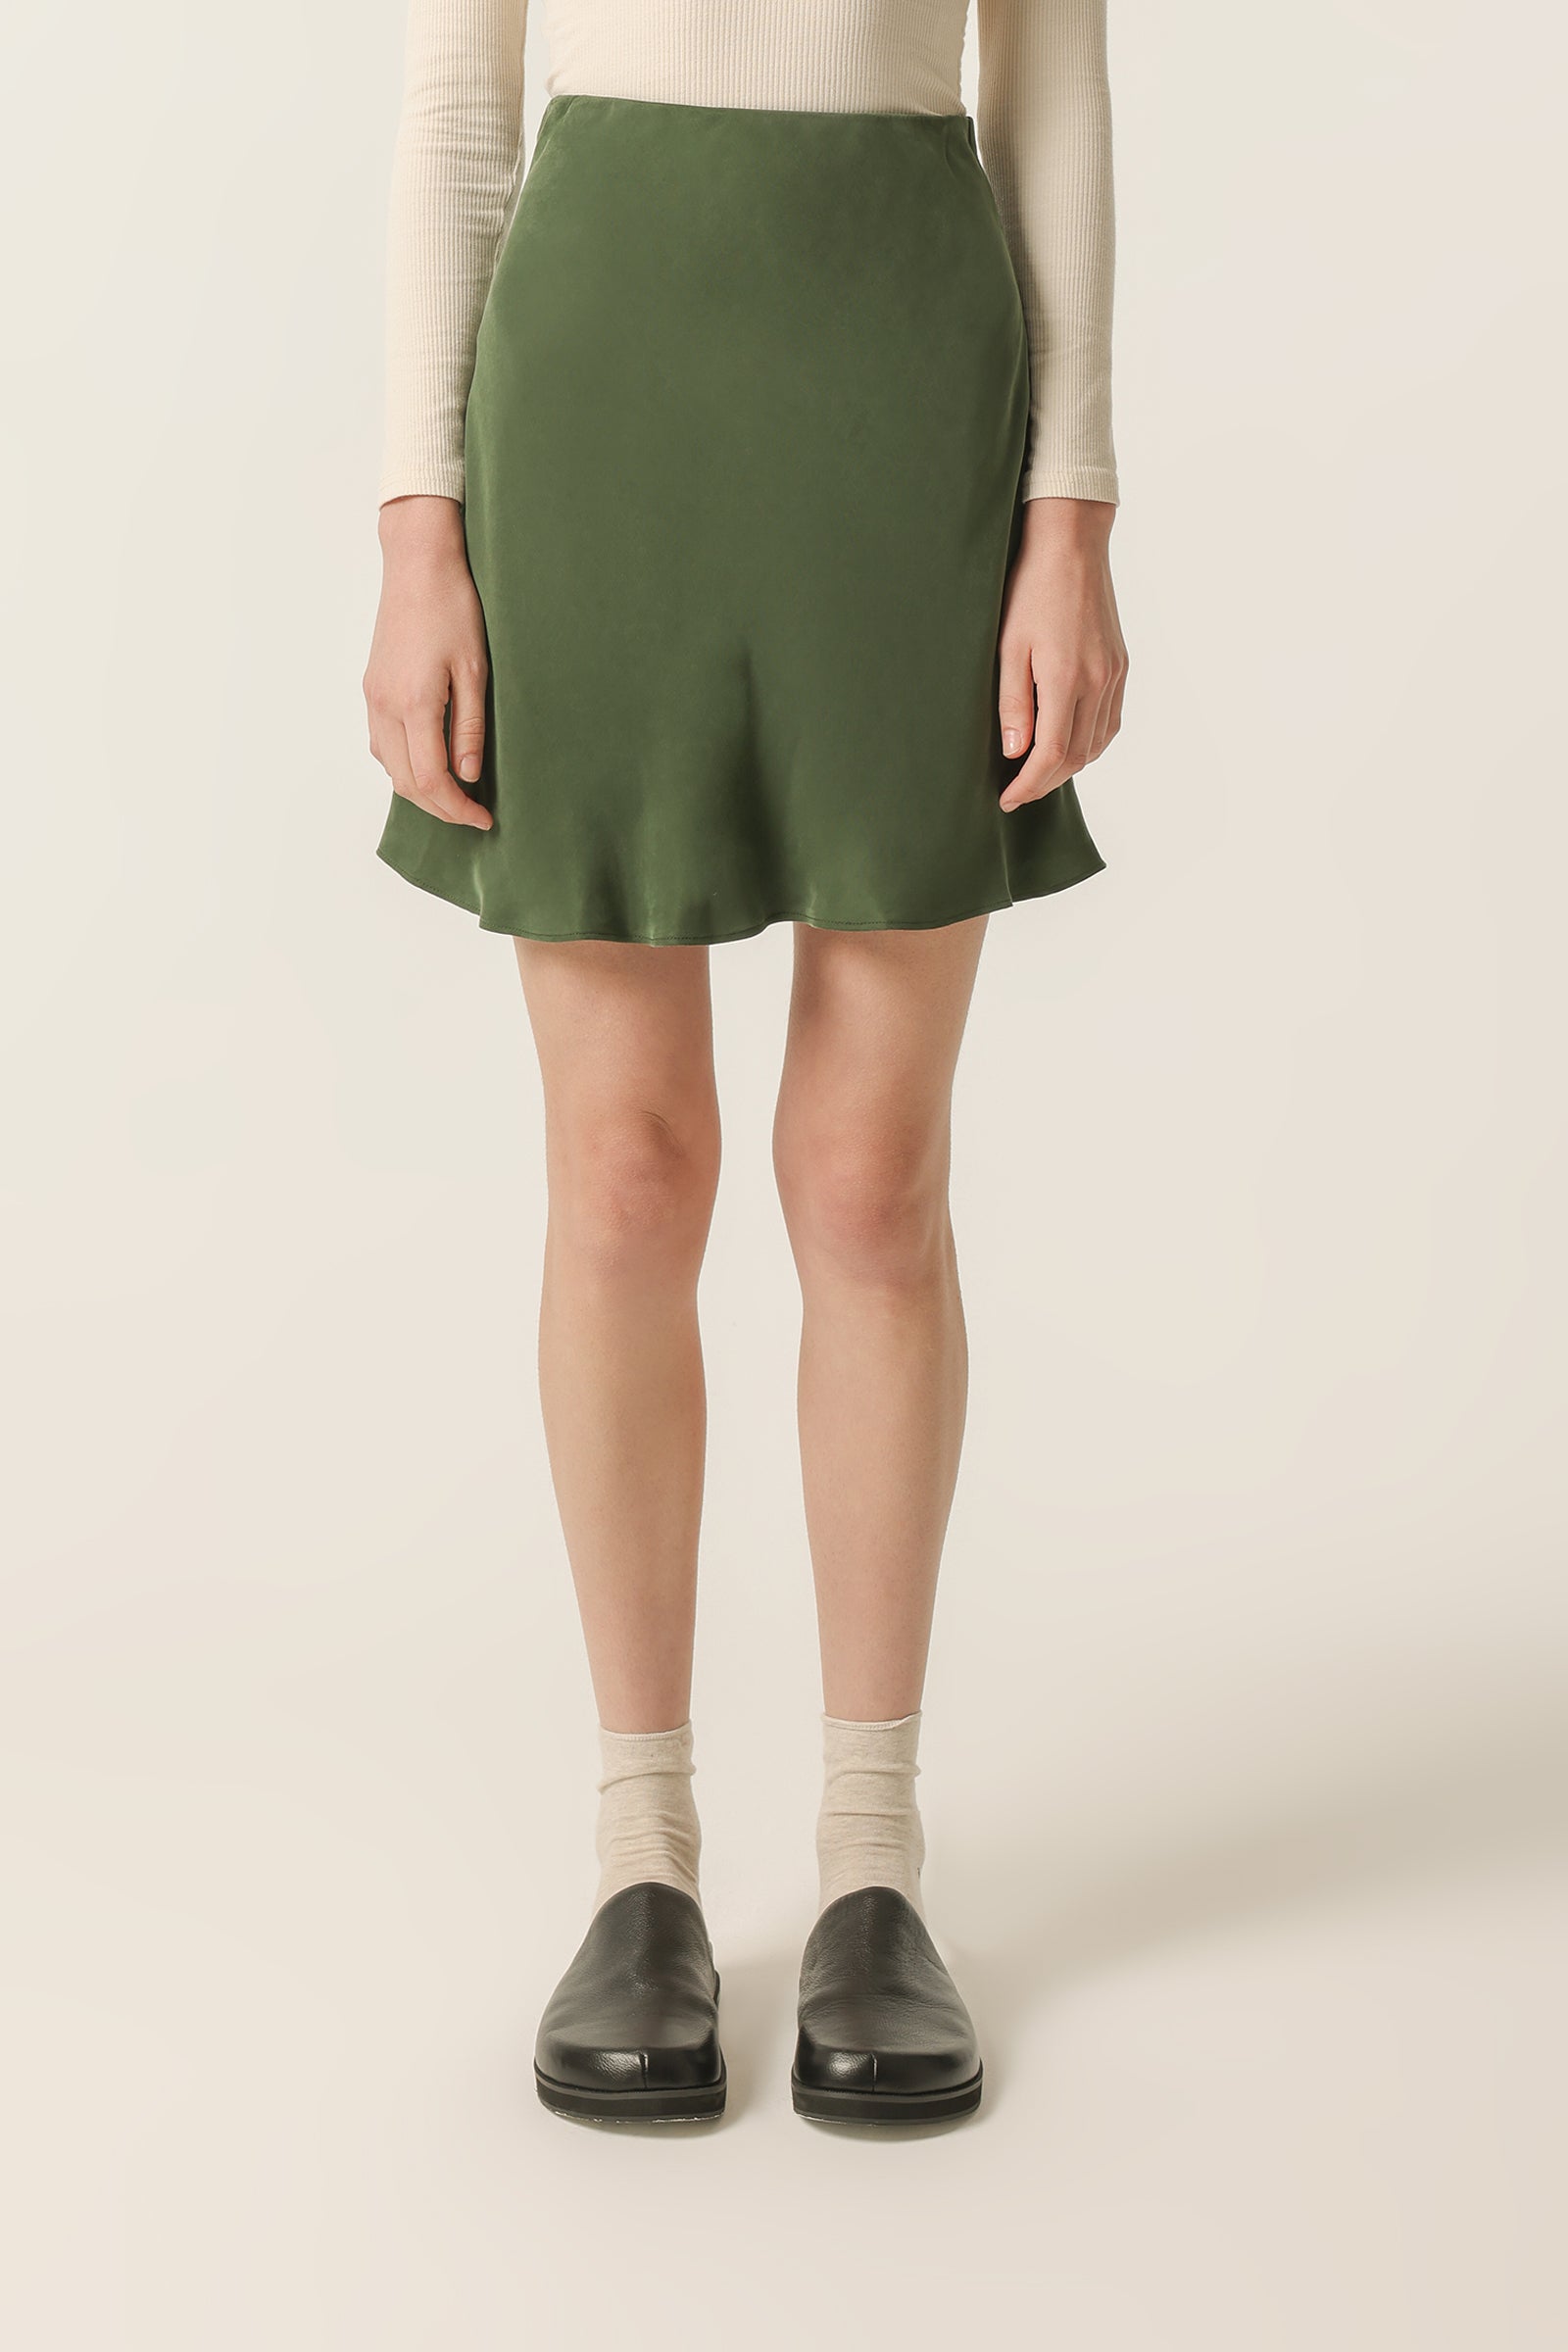 Nude Lucy Reese Cupro Mini Skirt in Pine